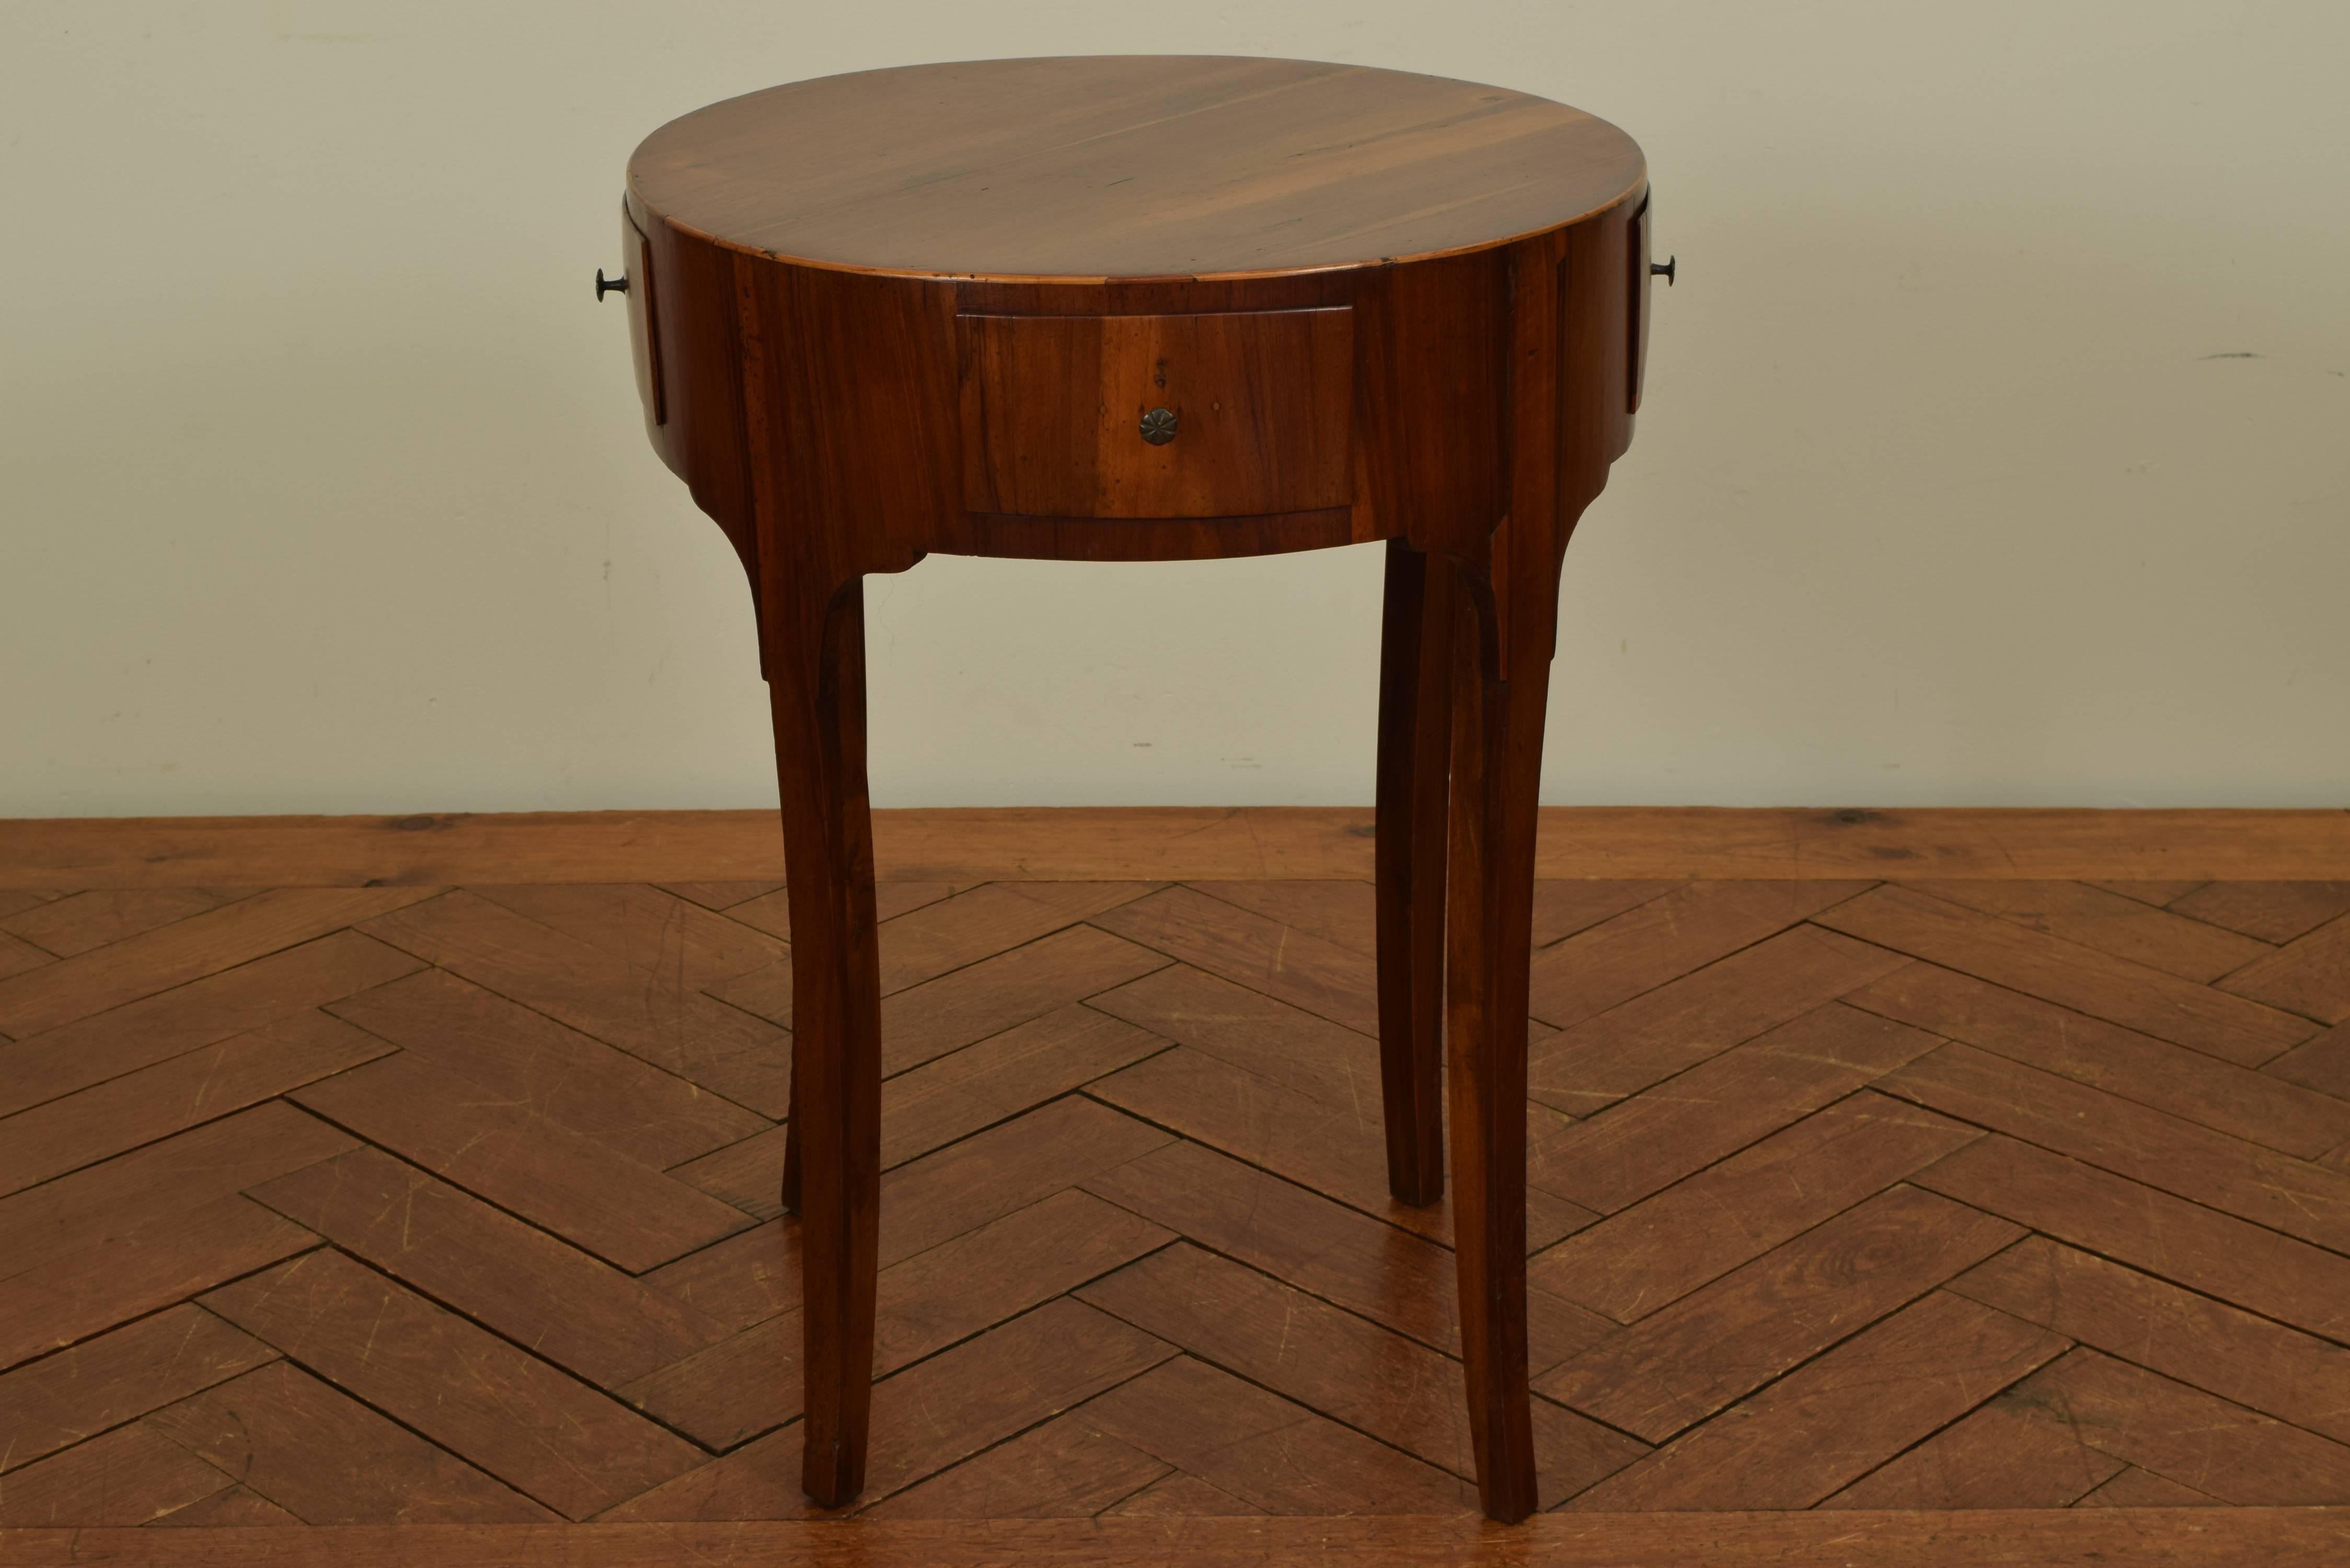 The round top above a conforming case housing four drawers, raised on slightly curved legs, second quarter of the 19th century.